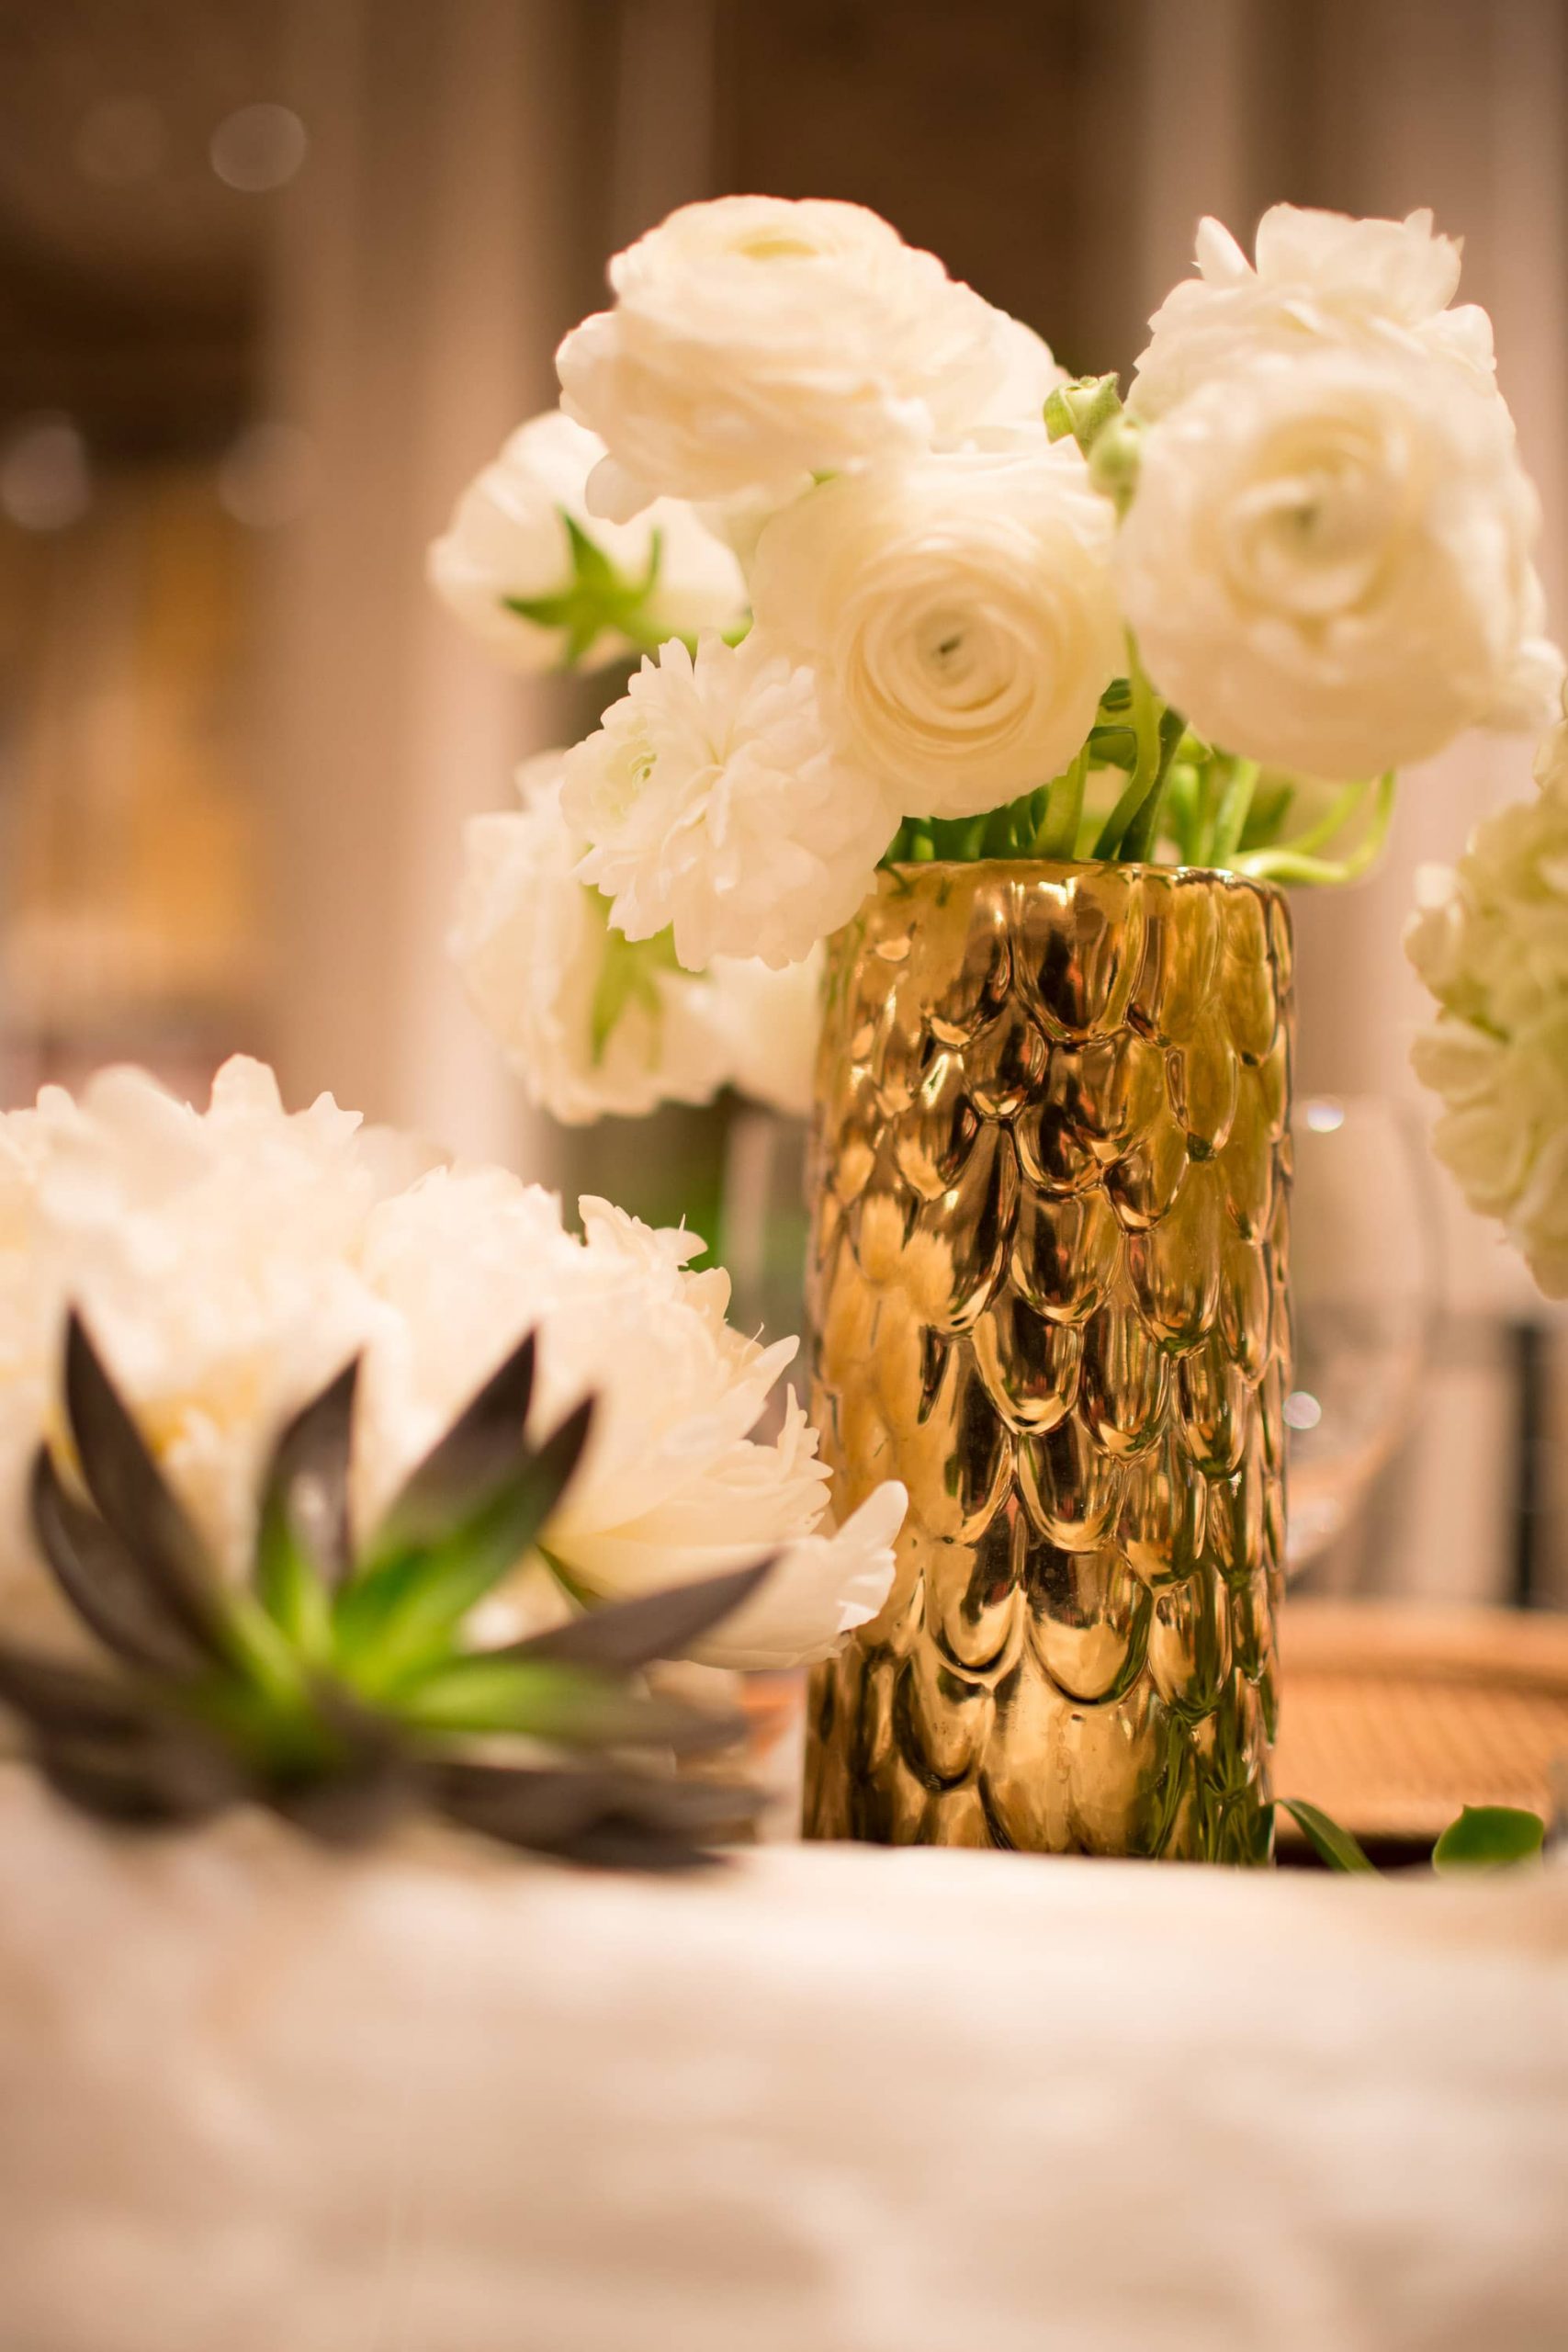 Floral decor at this New York Public Library wedding | Photo by Genevieve de Manio